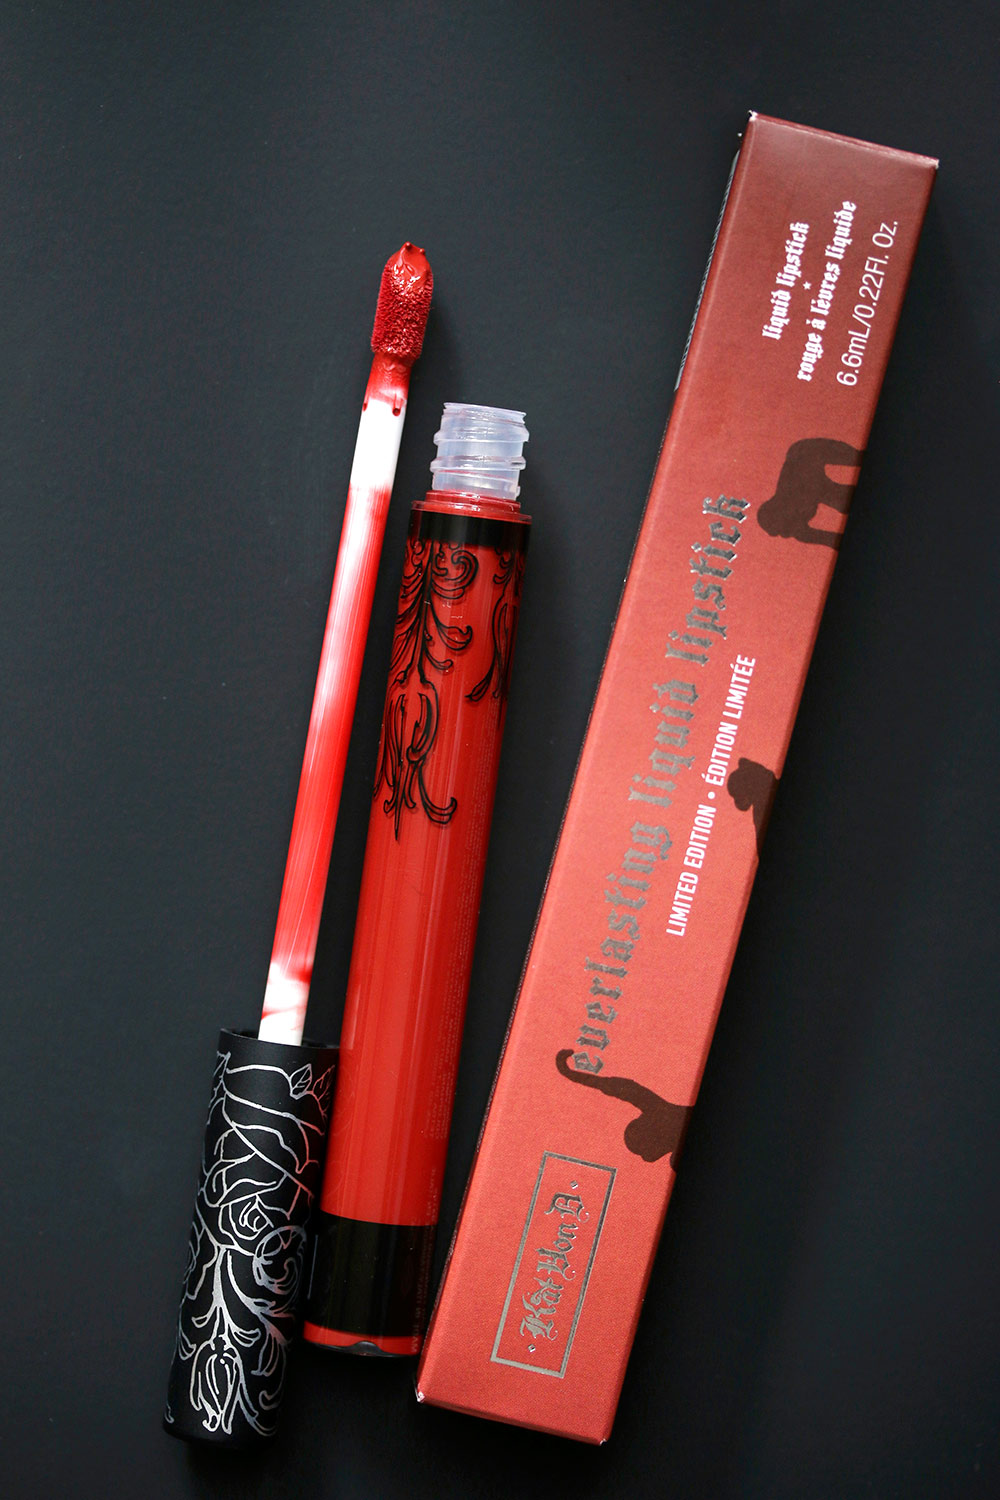 formel gnier Implement Righteous Red Kat Von D Beauty Everlasting Liquid Lipstick in Project  Chimps - Makeup and Beauty Blog